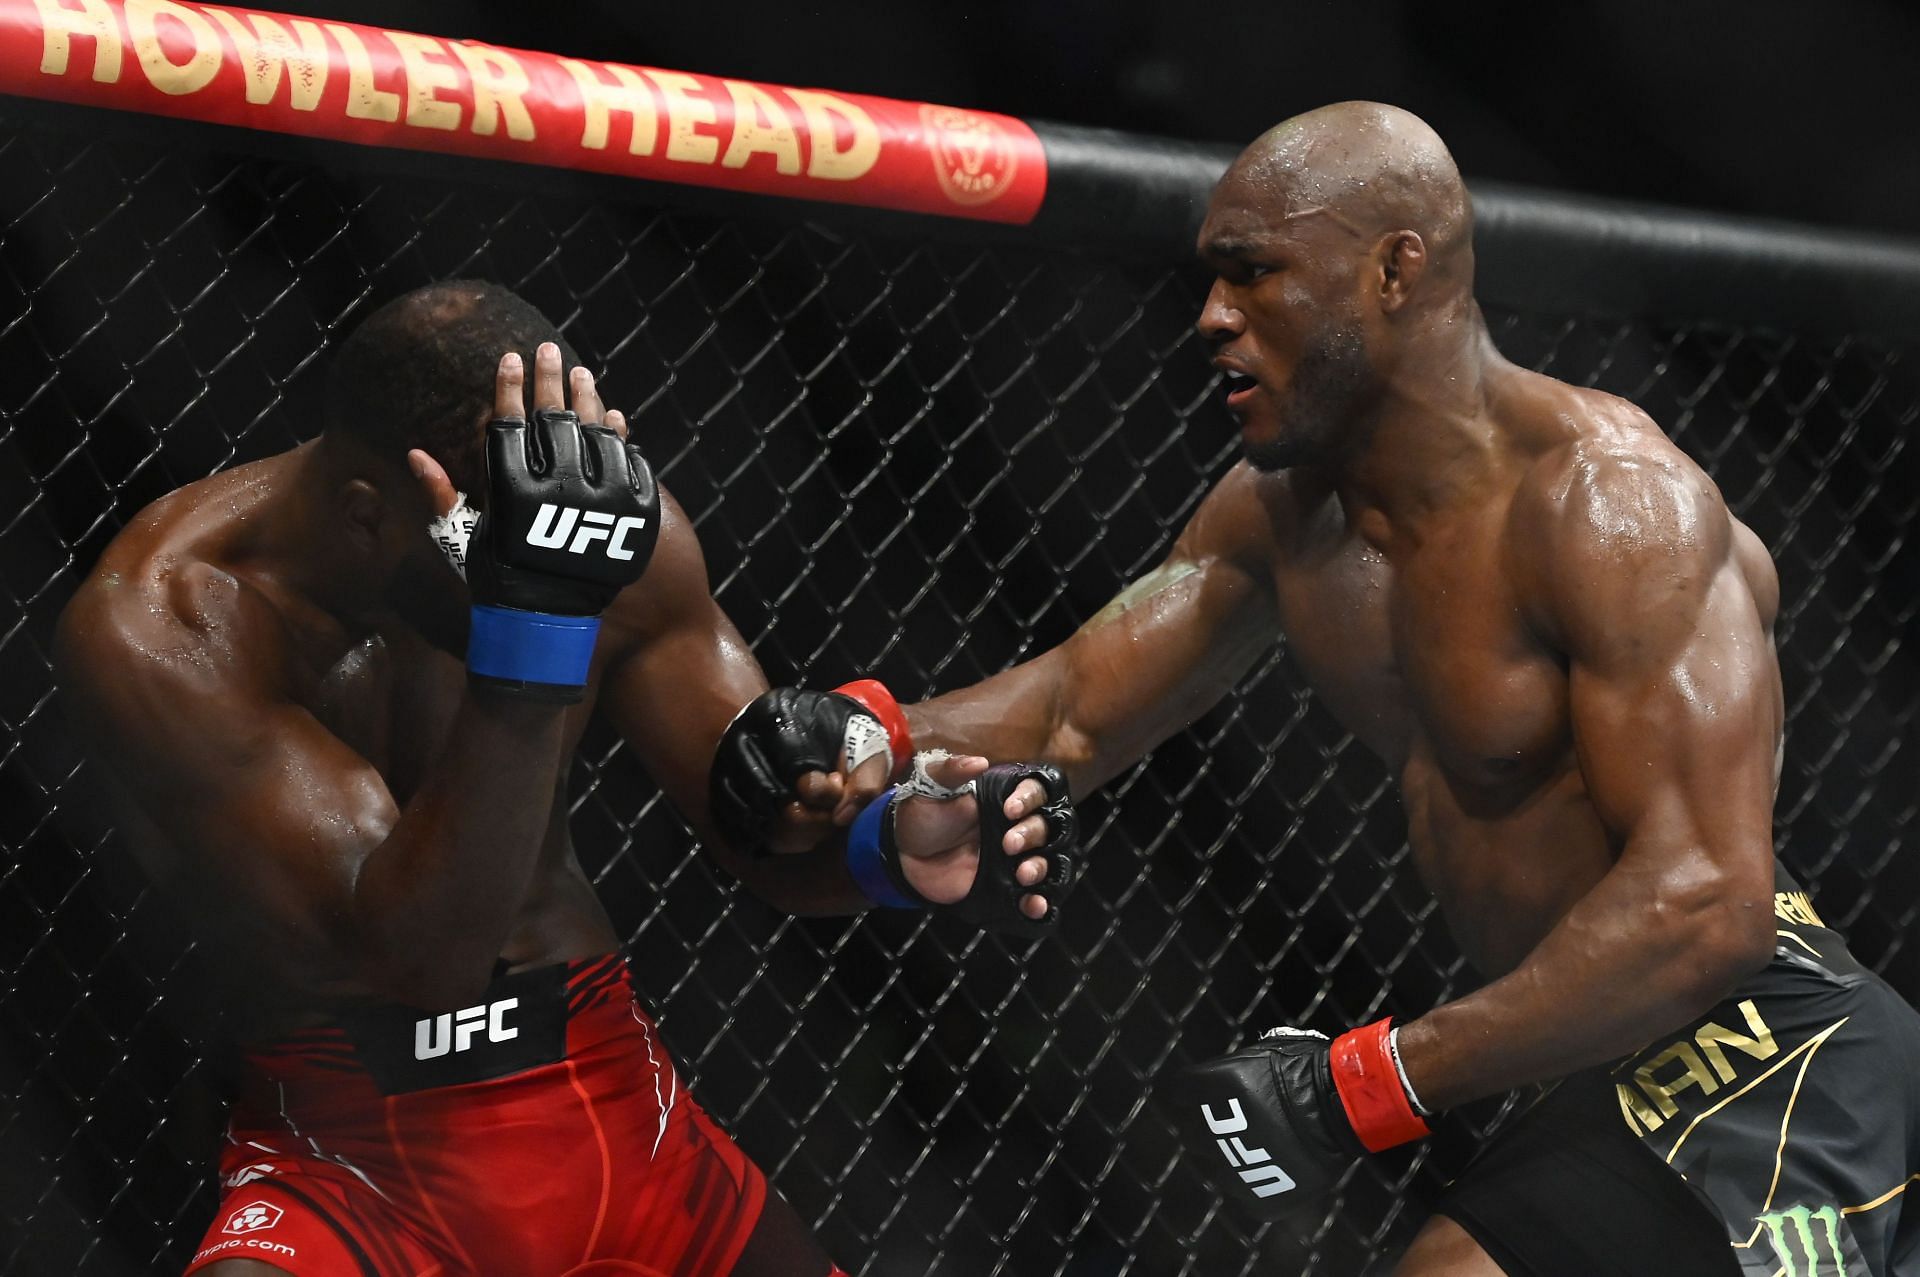 Kamaru Usman was dominating Leon Edwards before he was knocked out